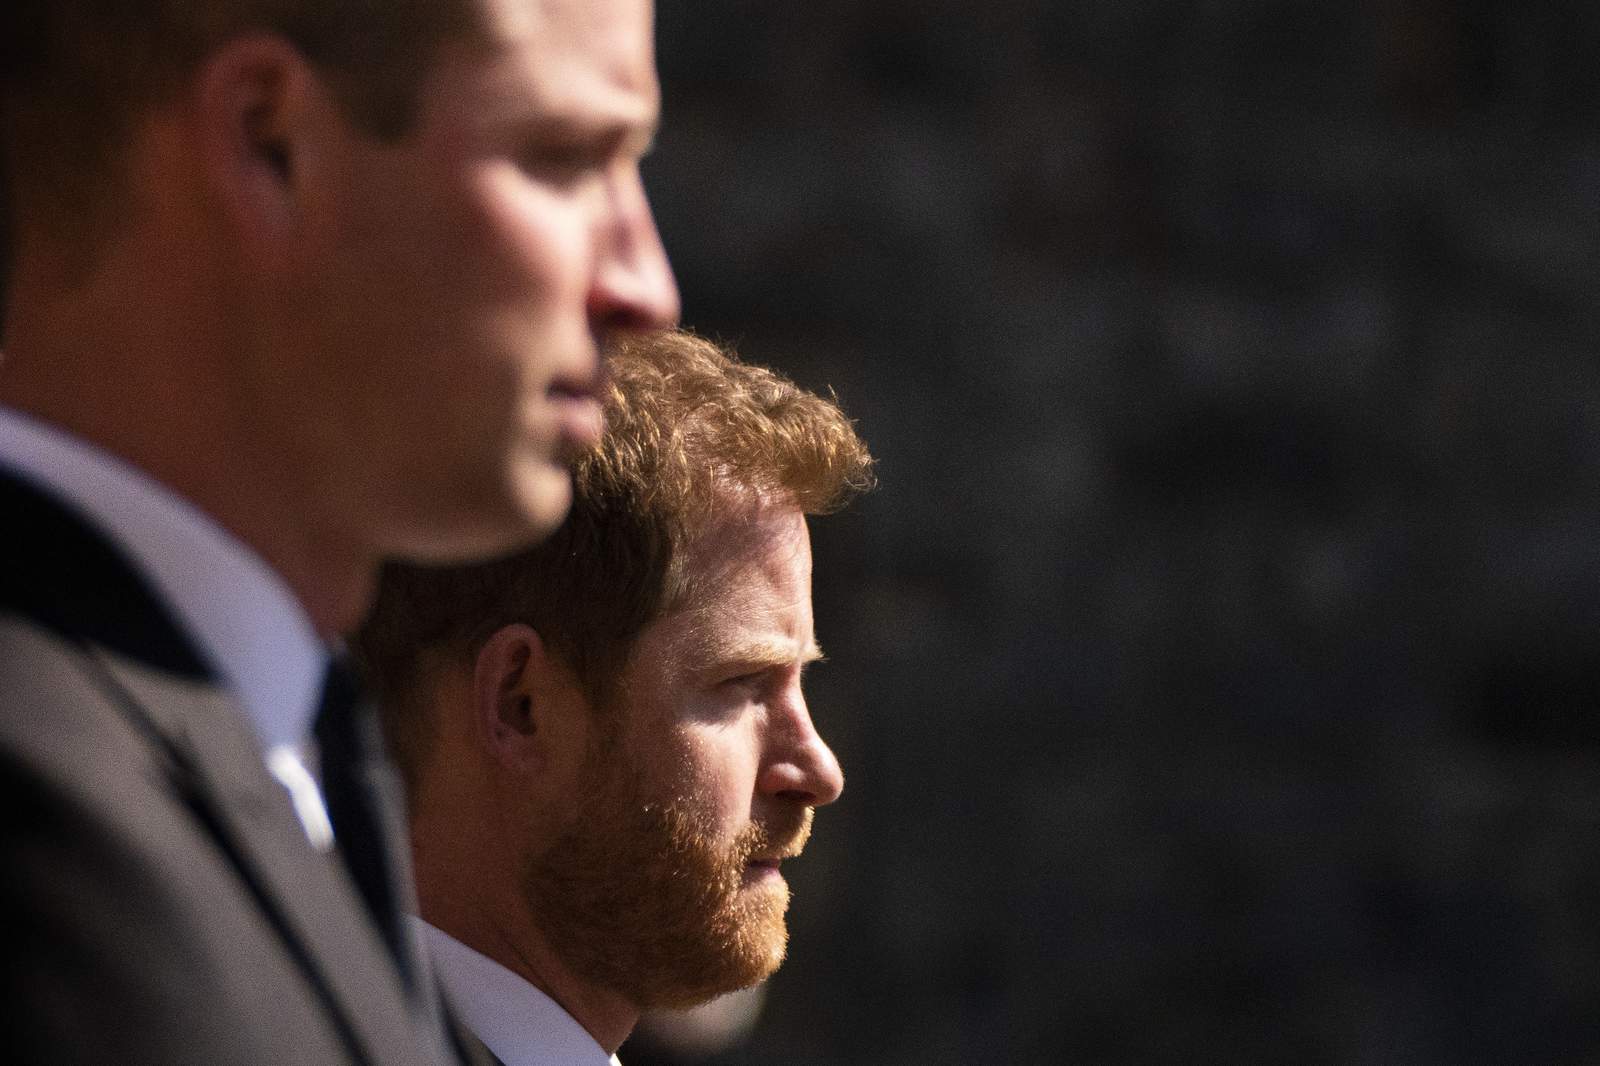 Harry, William seen chatting together after royal funeral